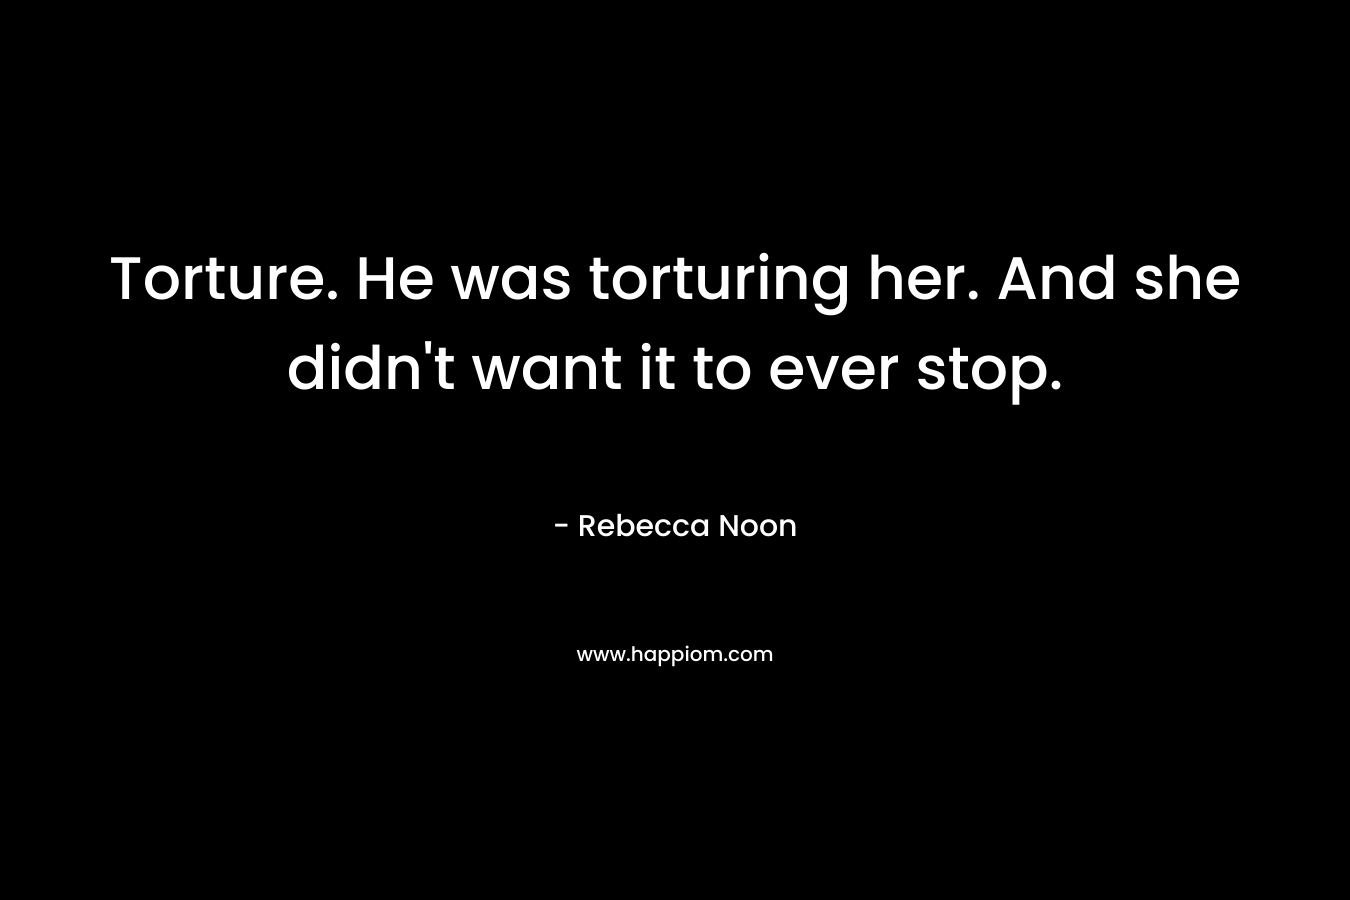 Torture. He was torturing her. And she didn’t want it to ever stop. – Rebecca Noon